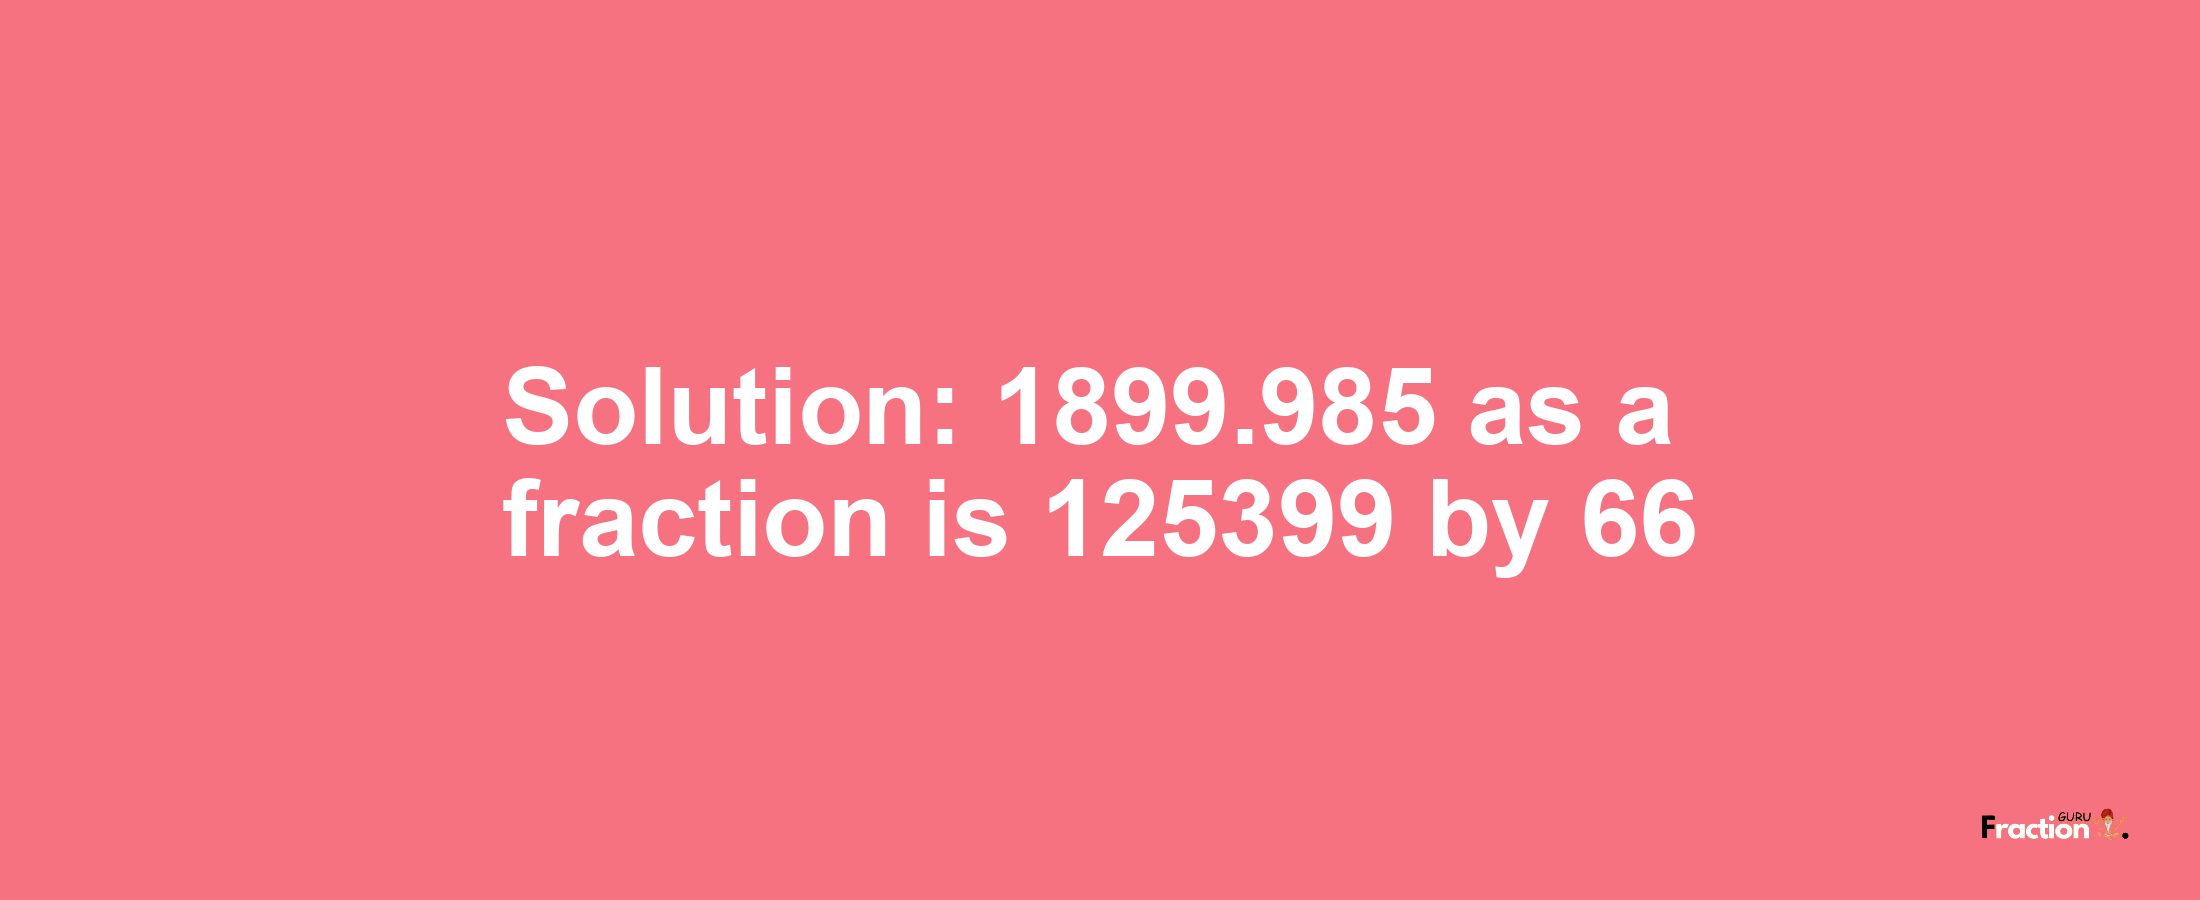 Solution:1899.985 as a fraction is 125399/66